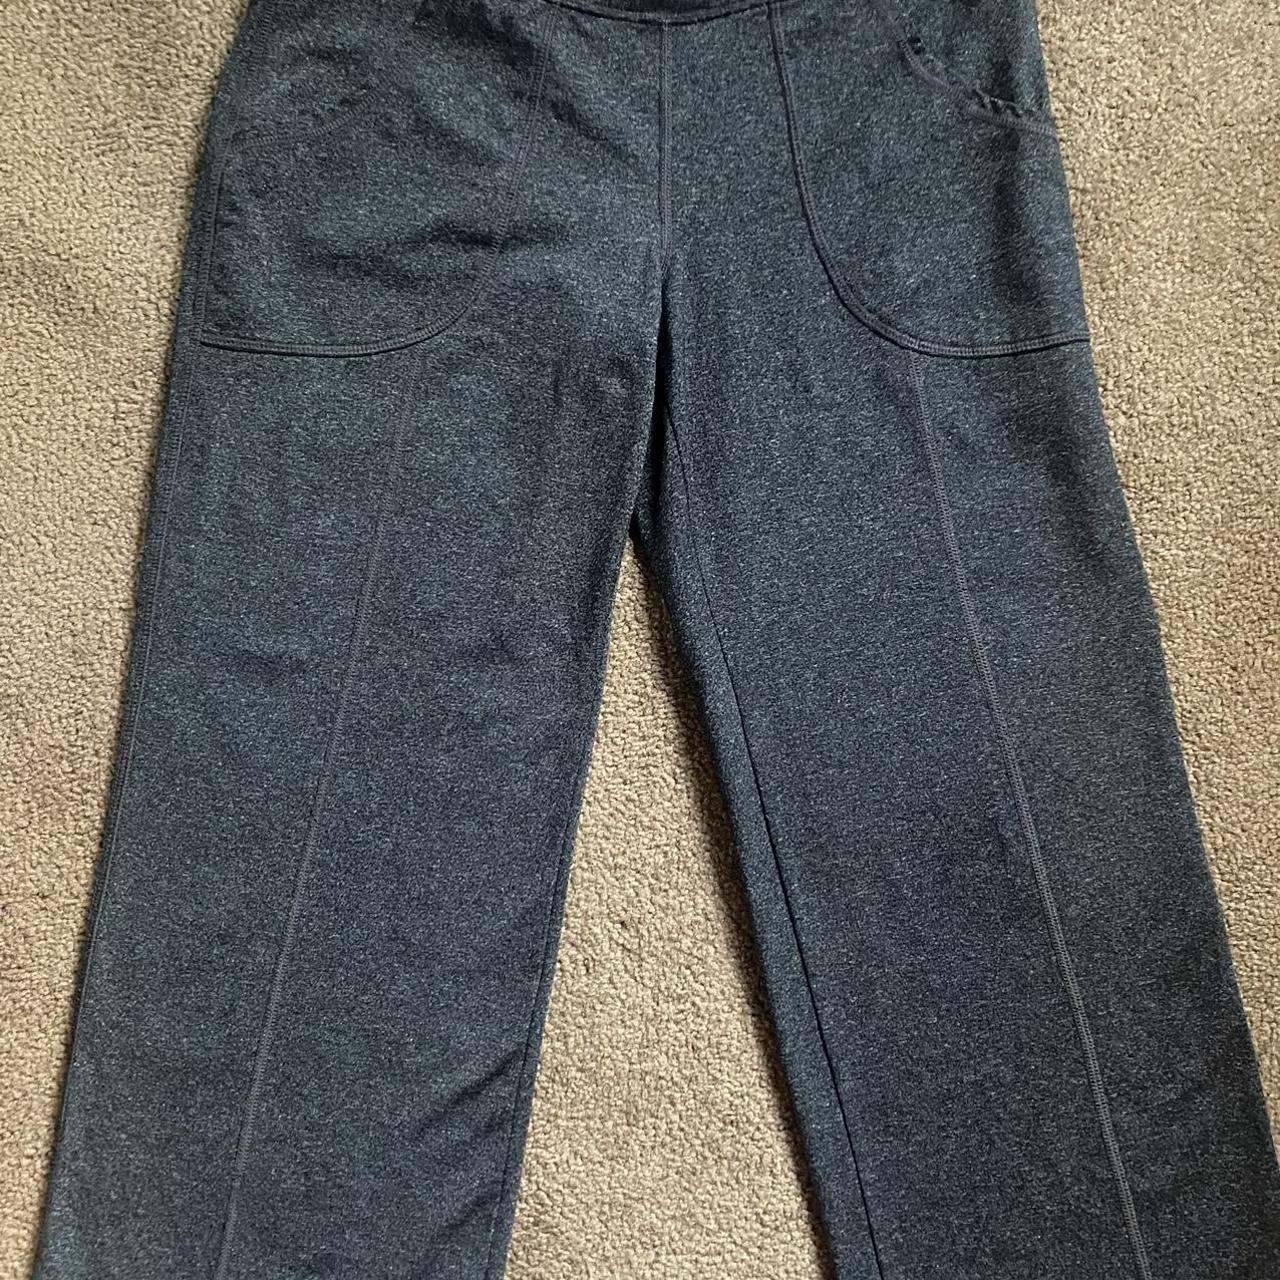 Lucy active wear yoga pant size small crop -Missing - Depop